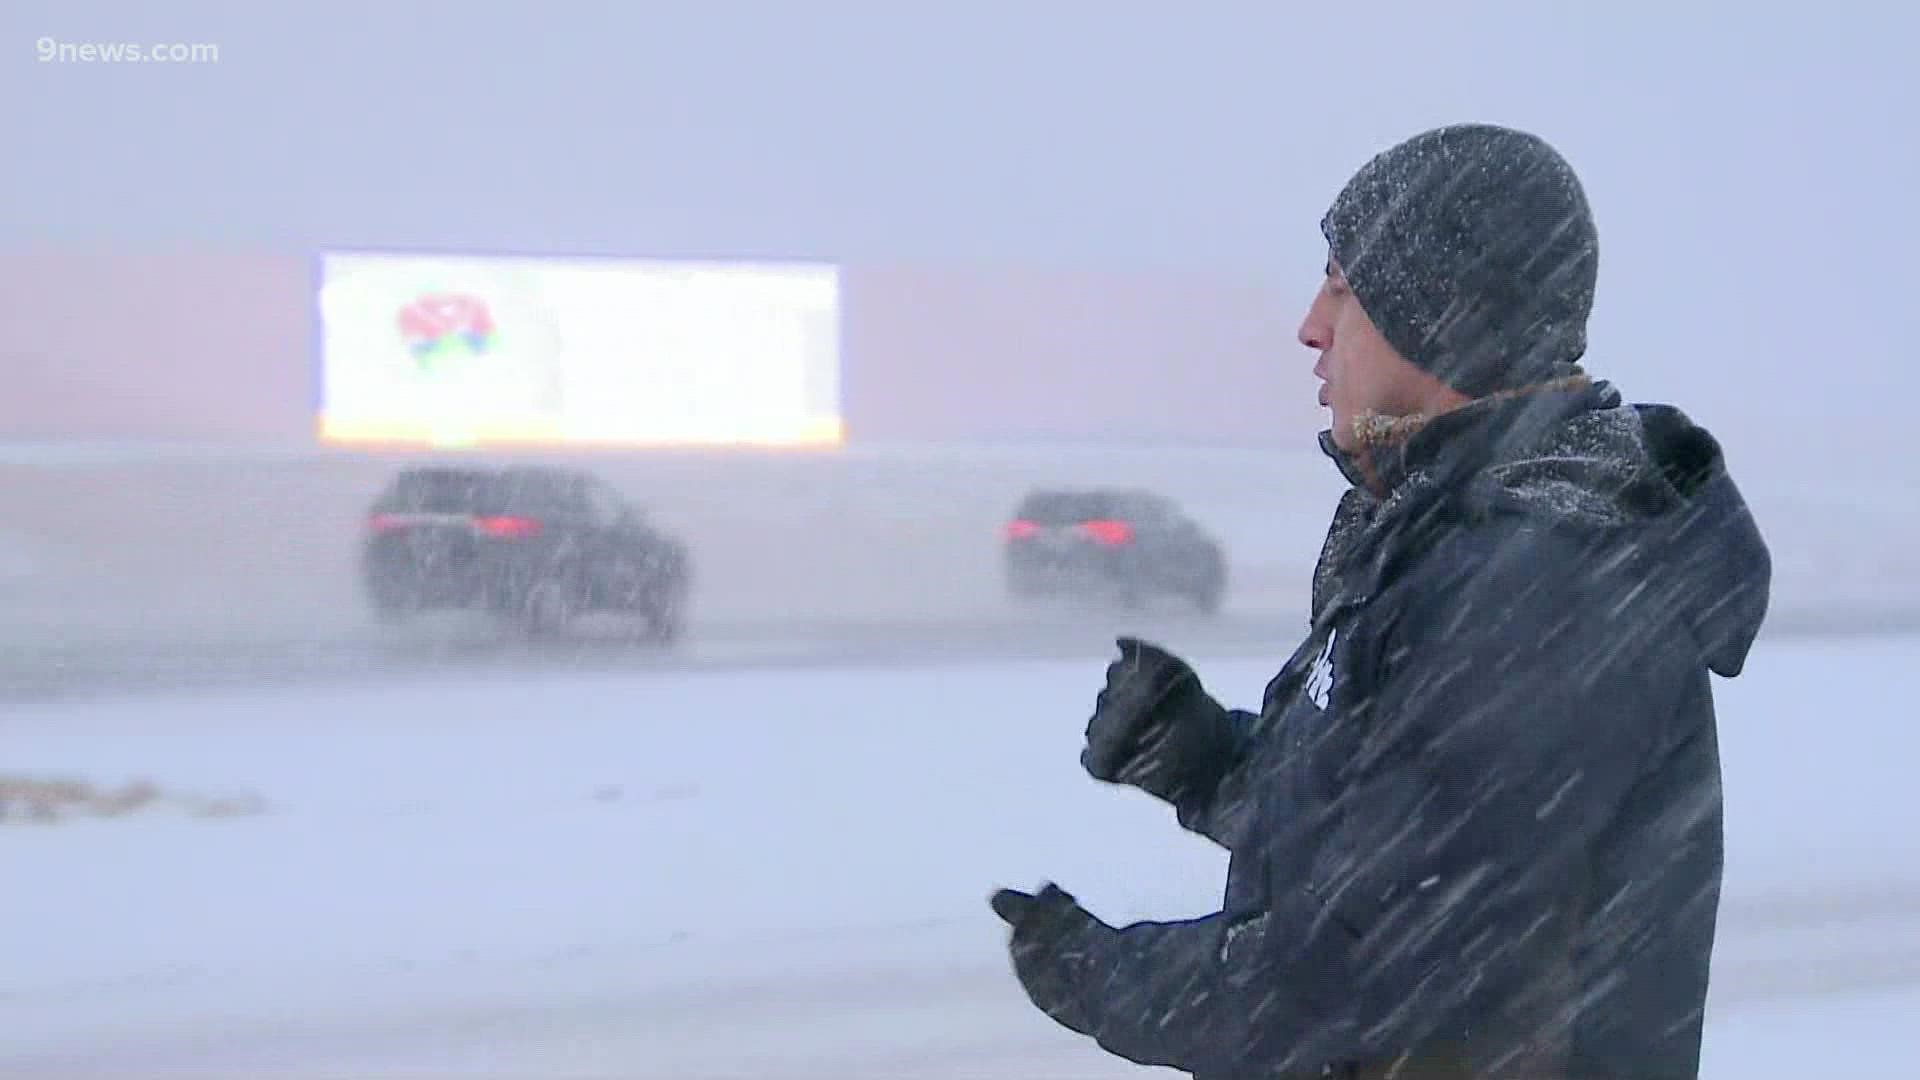 9NEWS Reporter Jordan Chavez has a look at snowy road conditions near Denver International Airport on Tuesday morning.